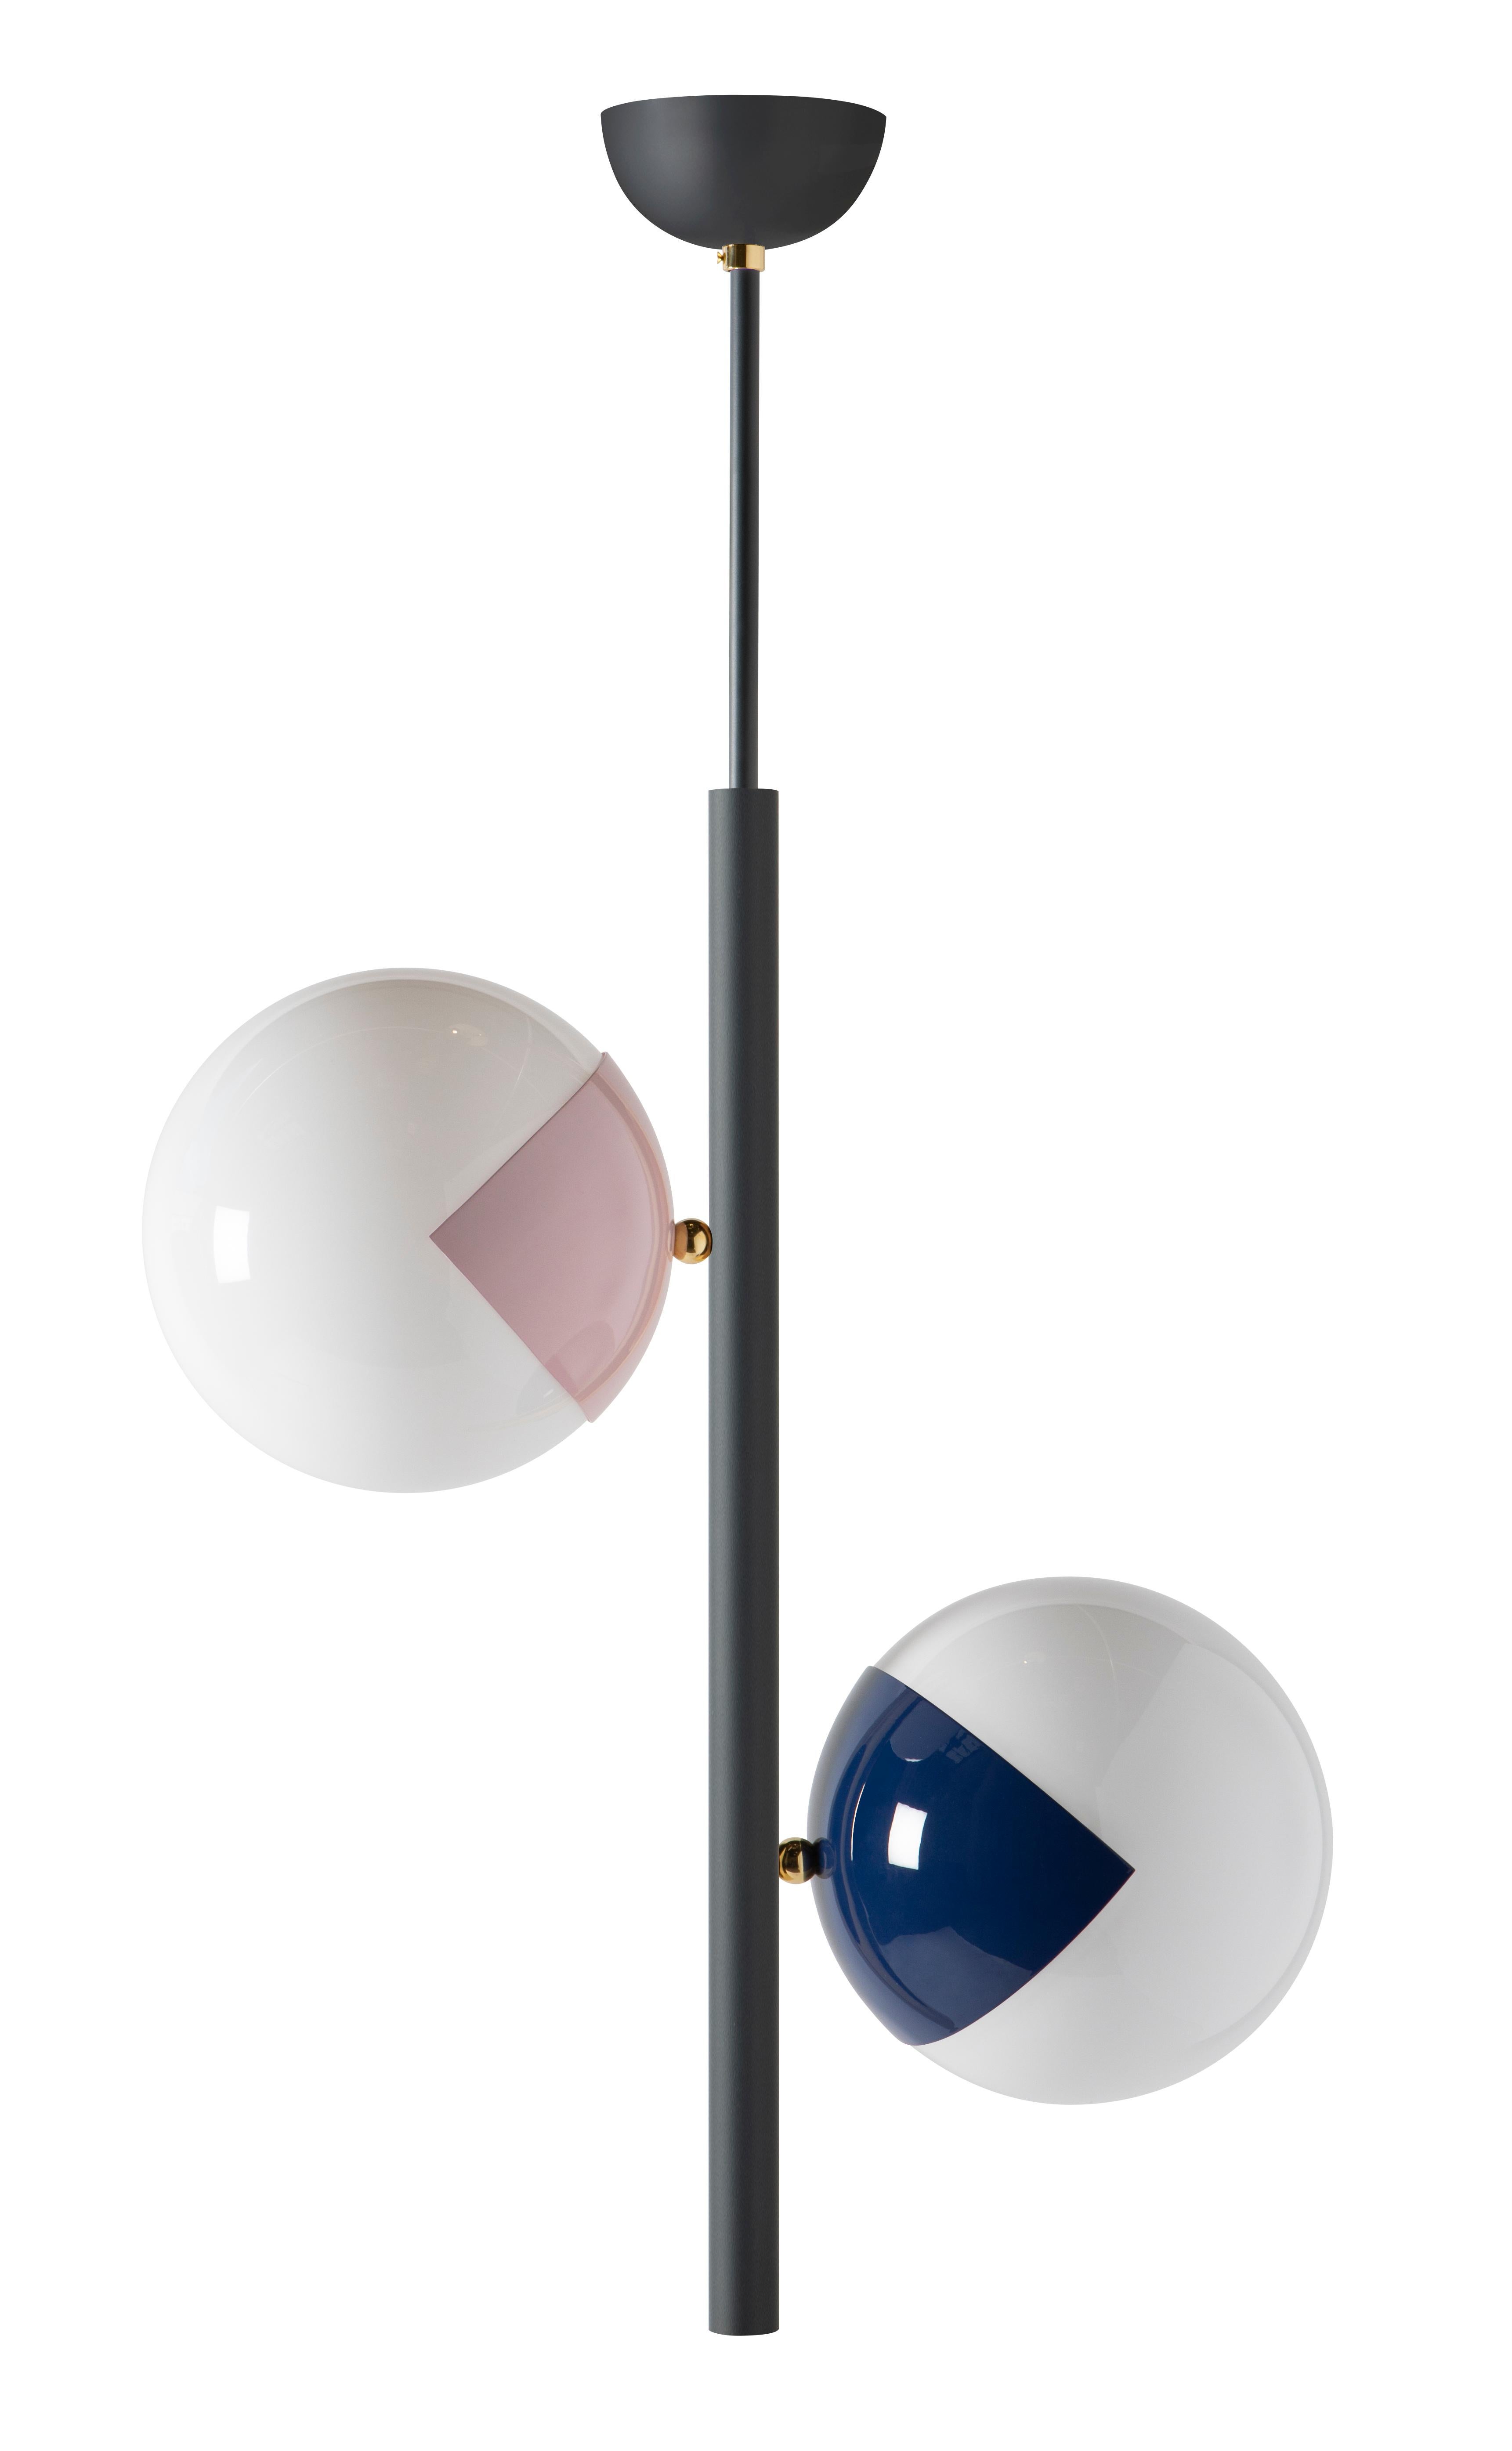 Pop-up chandelier by Magic Circus Editions.
Dimensions: W 58 x H 135 cm
 Diameter sphere 25 cm
Materials: smooth brass and glossy mouth blown glass

Available finishes: Brass, nickel, matte black tube and brass, matte black tube and